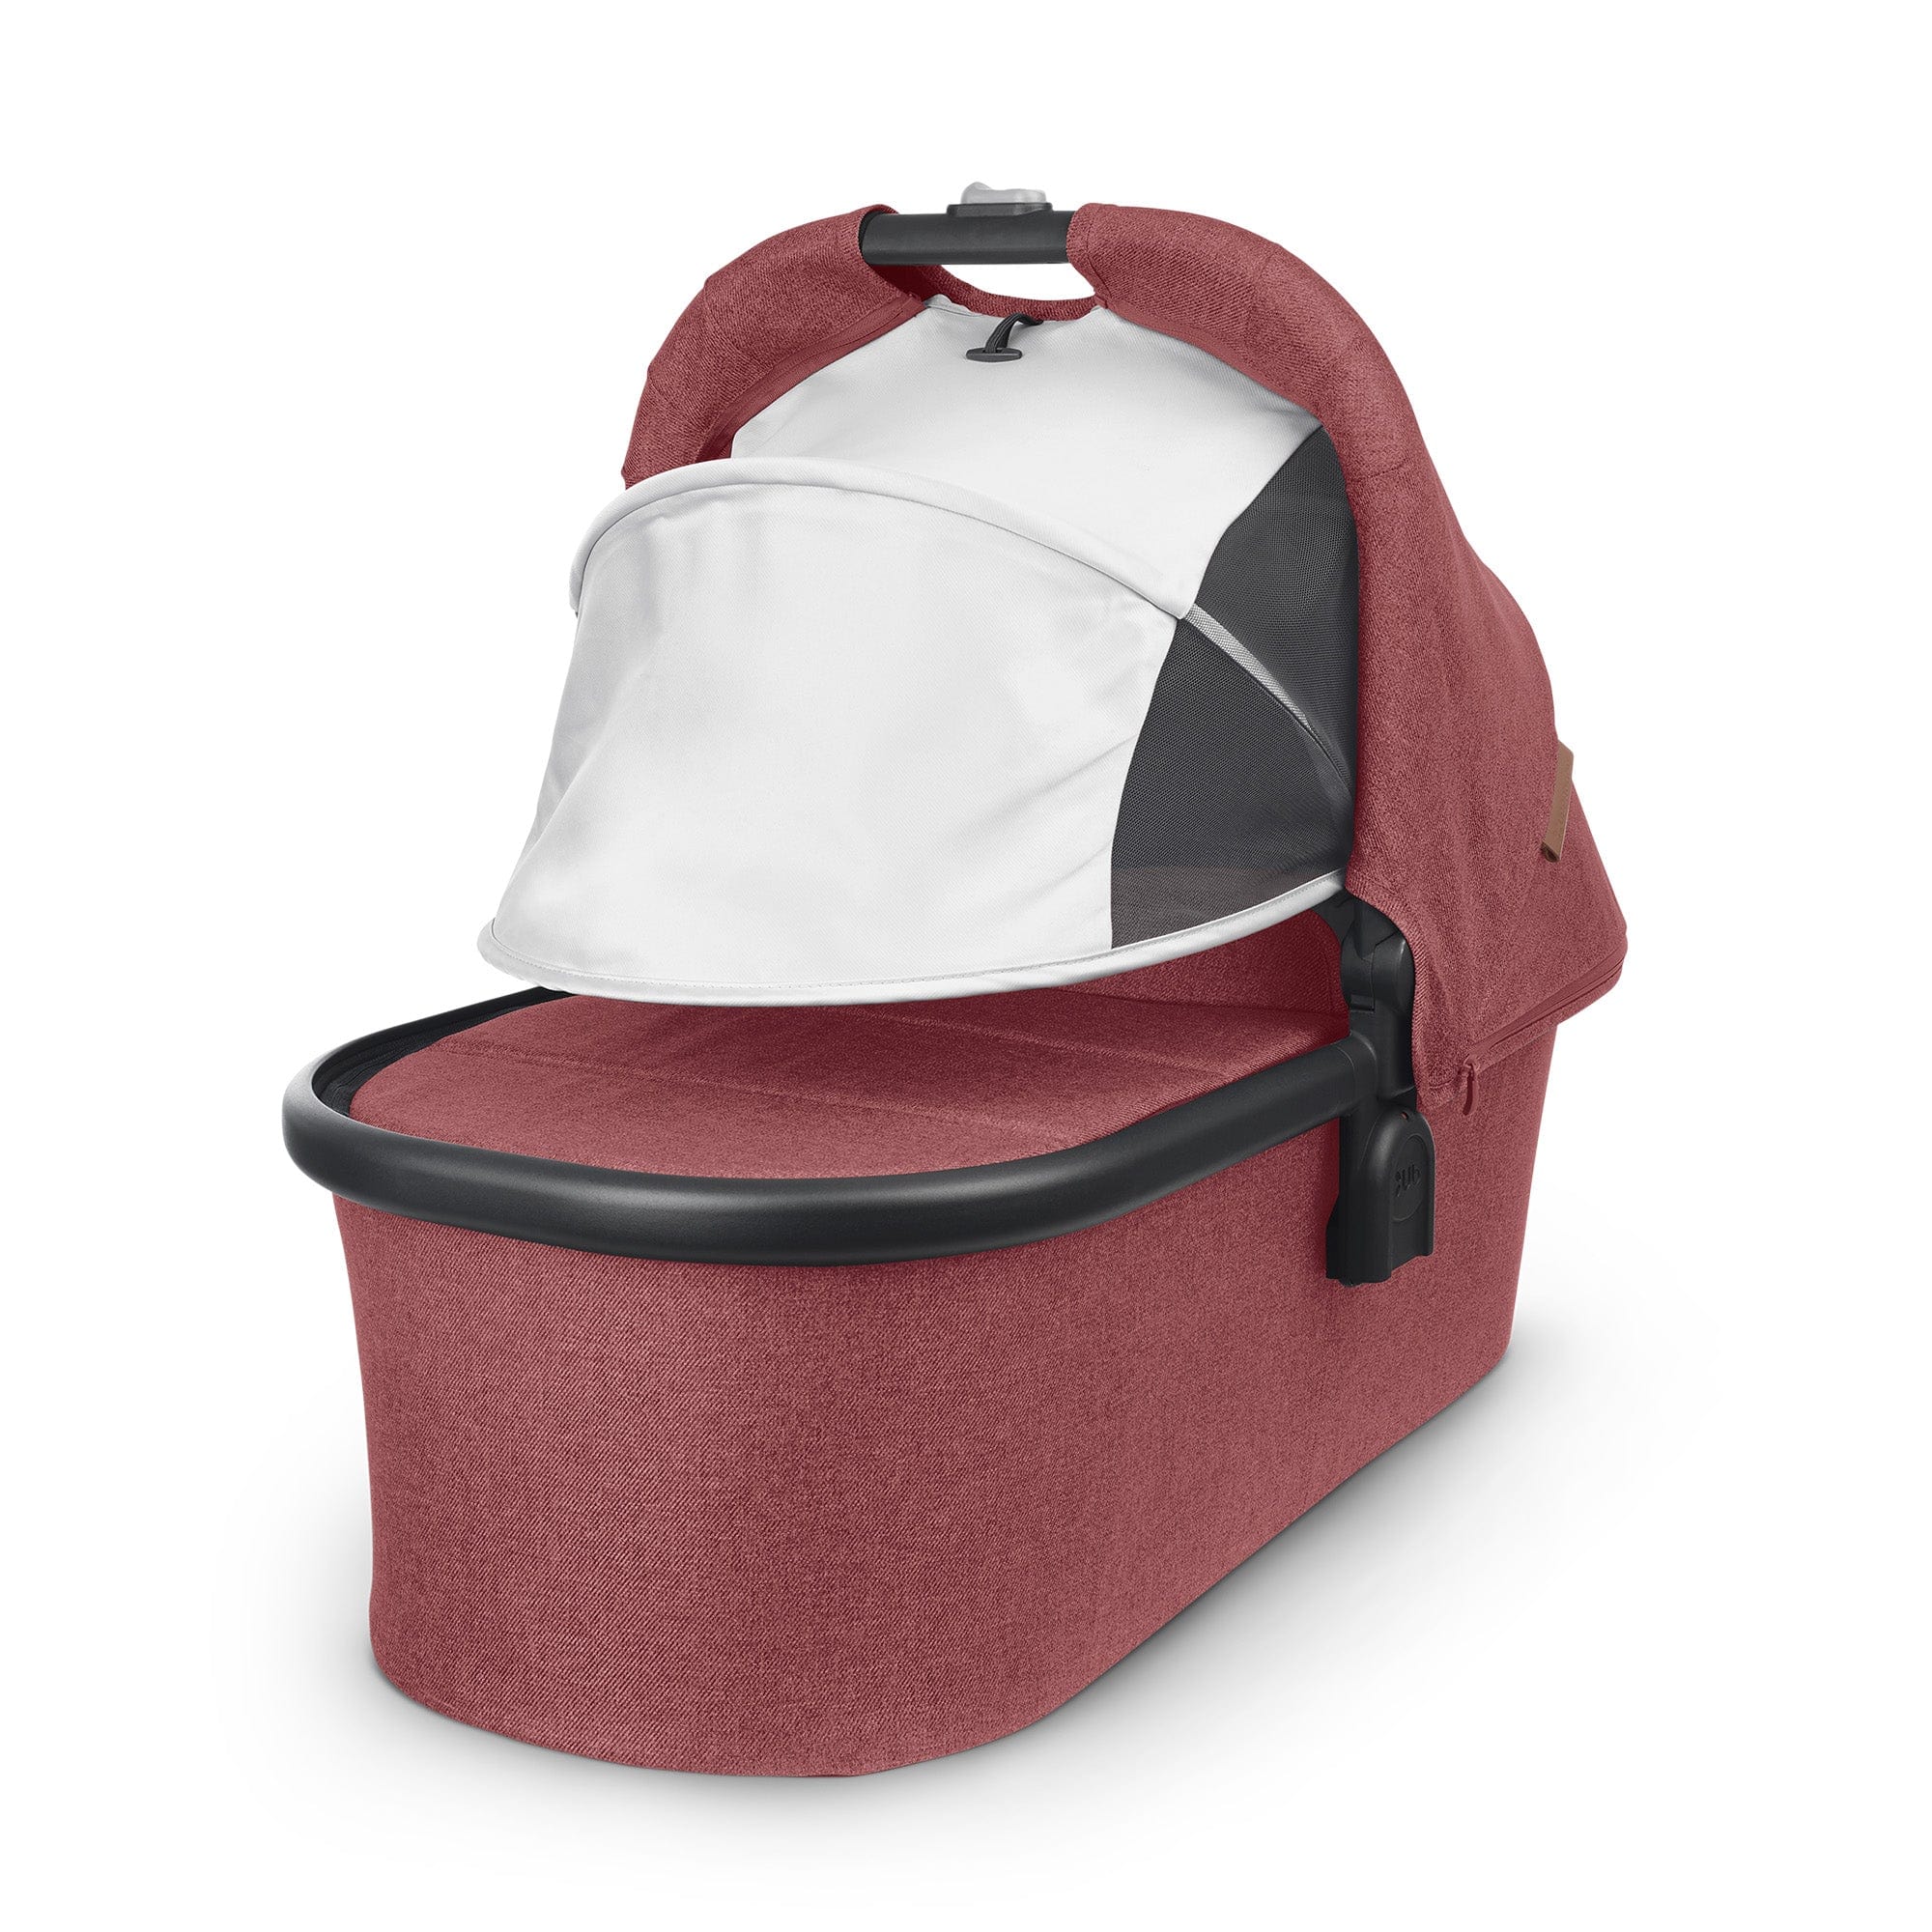 Uppababy travel systems UPPAbaby Cruz v2 Cloud T & Base Travel System - Lucy 13986-LUC